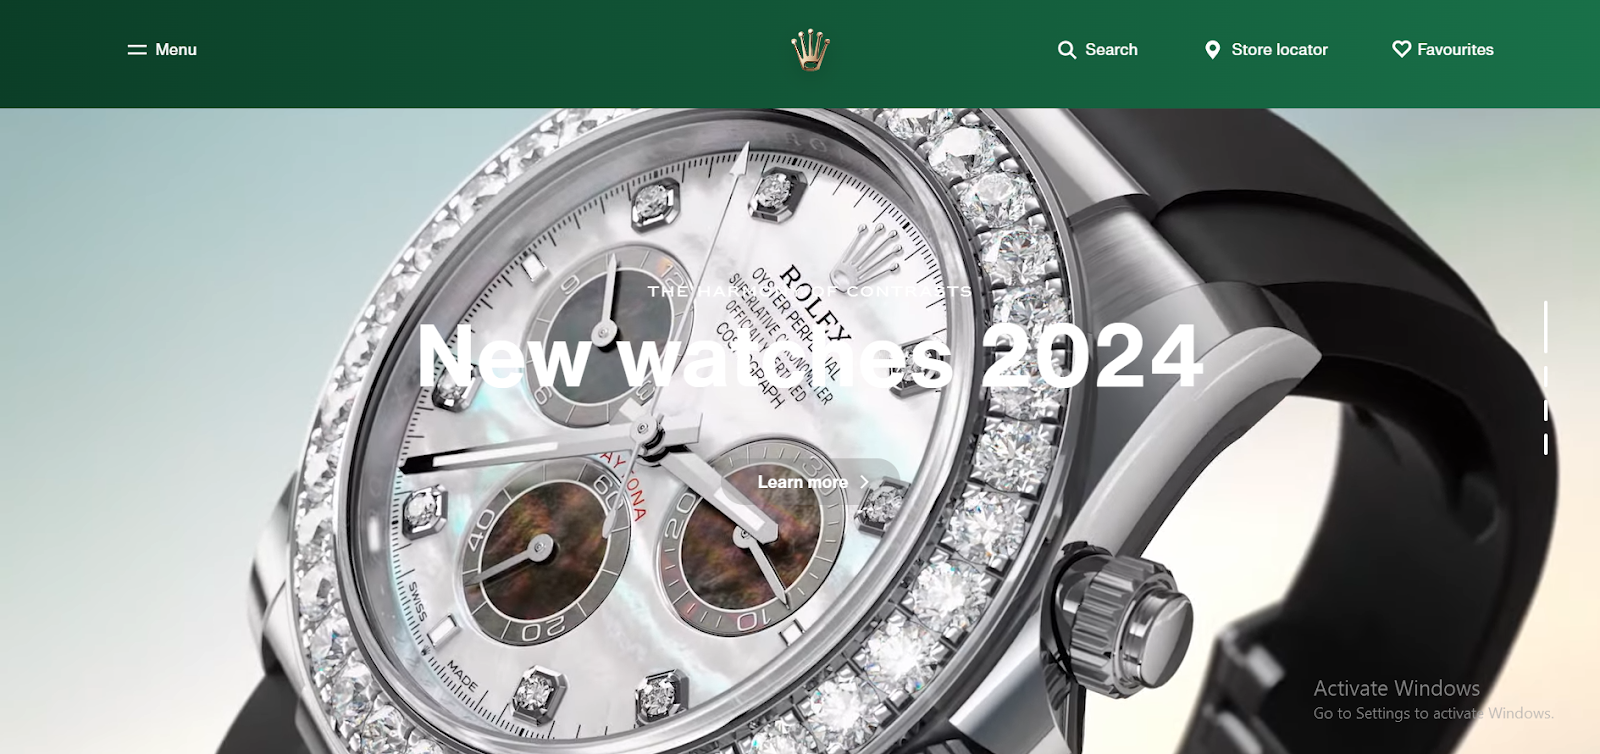 video as background image css example from rolex